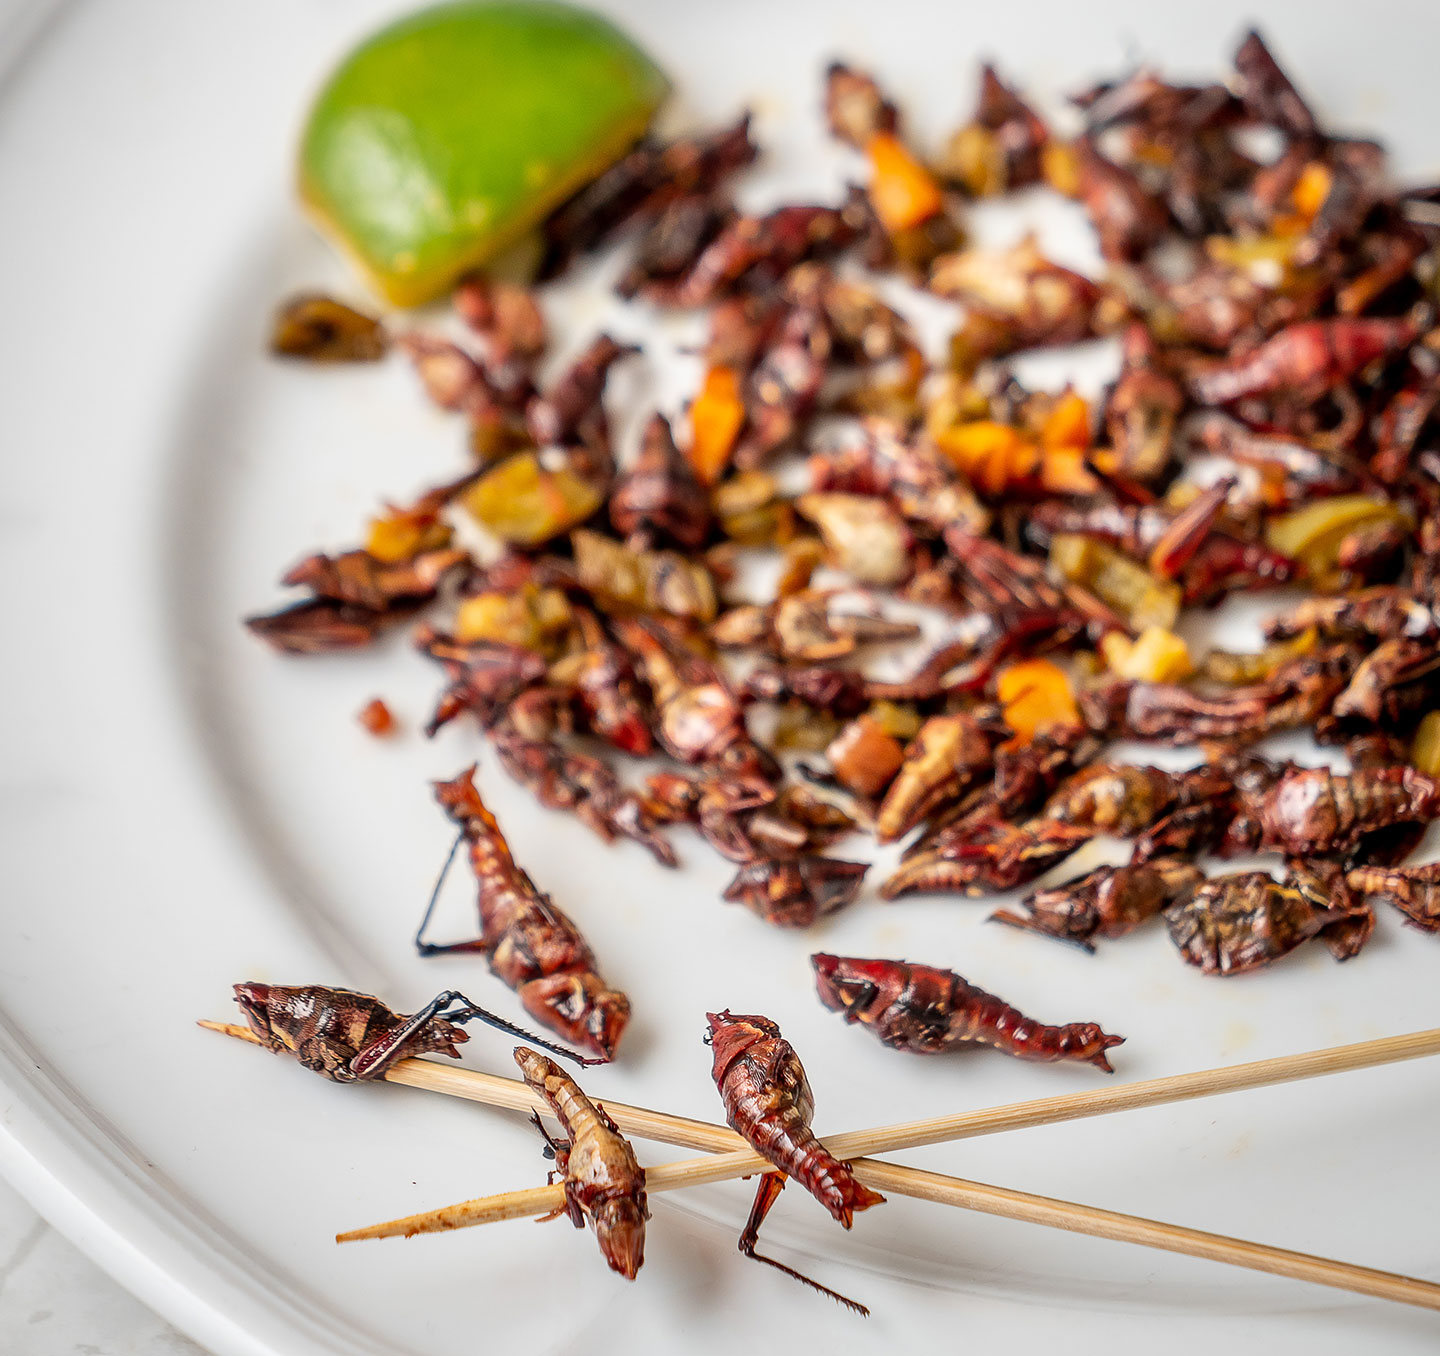 This plate of grasshoppers (chapulines) is from Tolache, a Mexican restaurant in New York City.